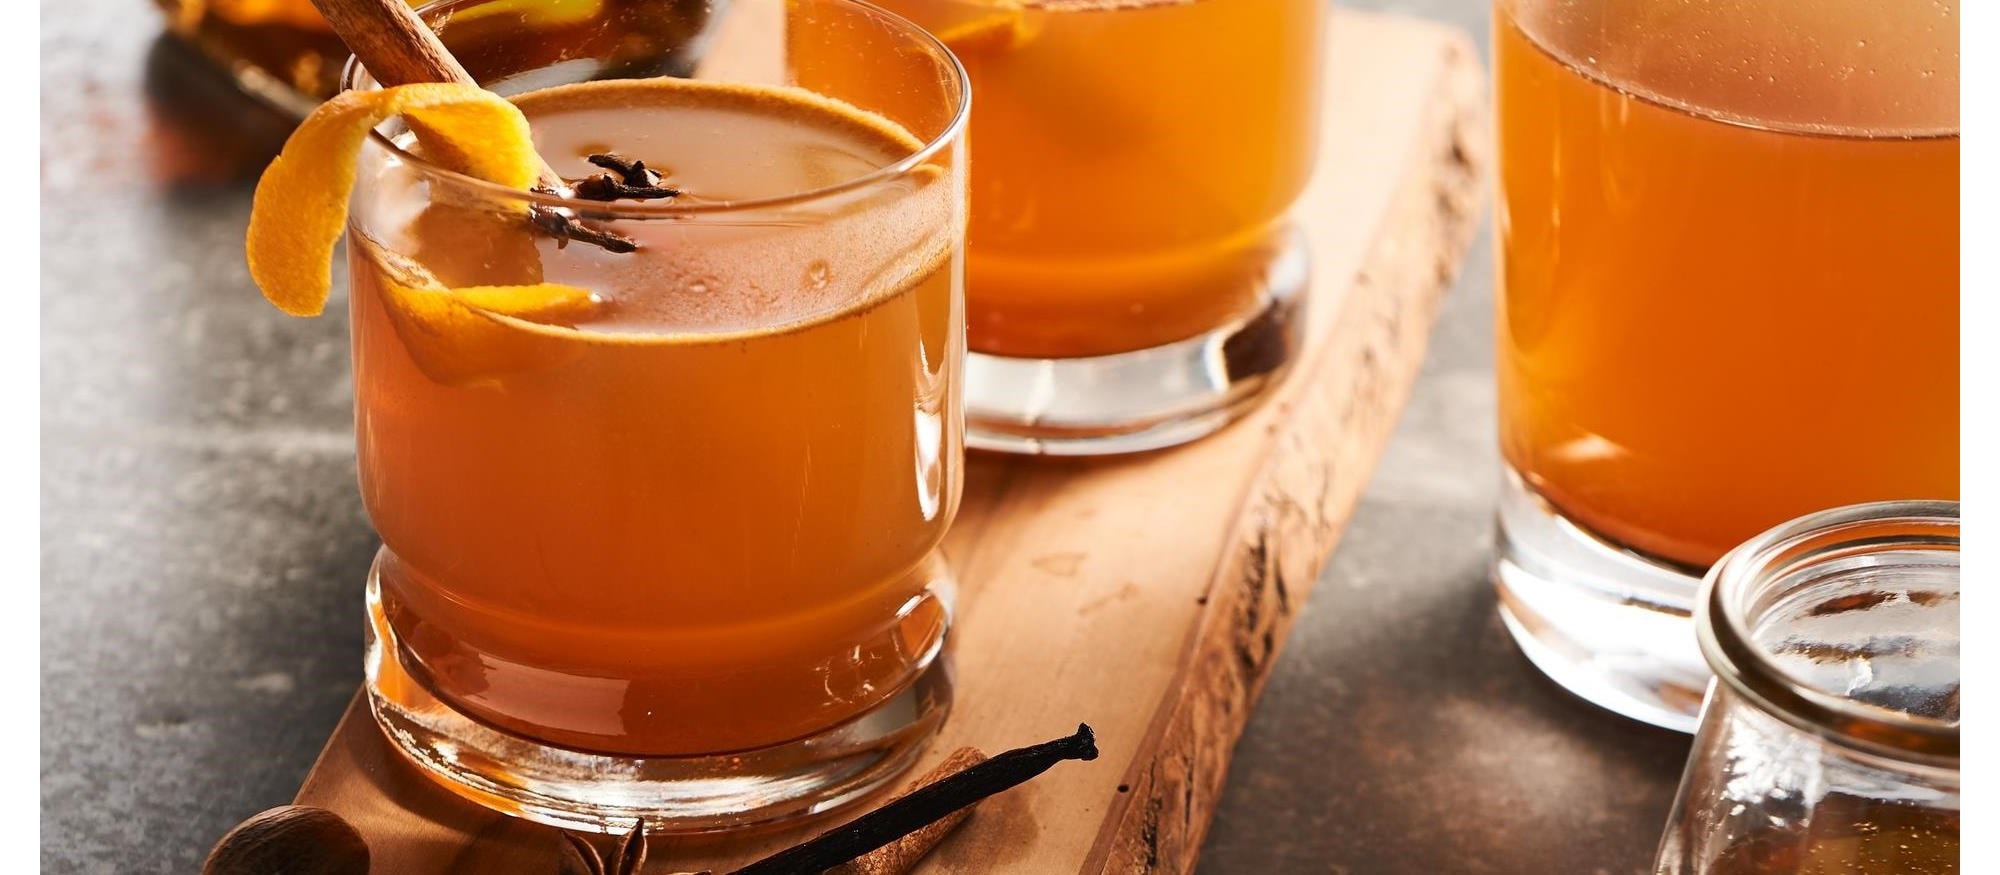 The Wolf Vacuum Seal Drawer infuses enough cheer to last the year with this holiday mulled cider.